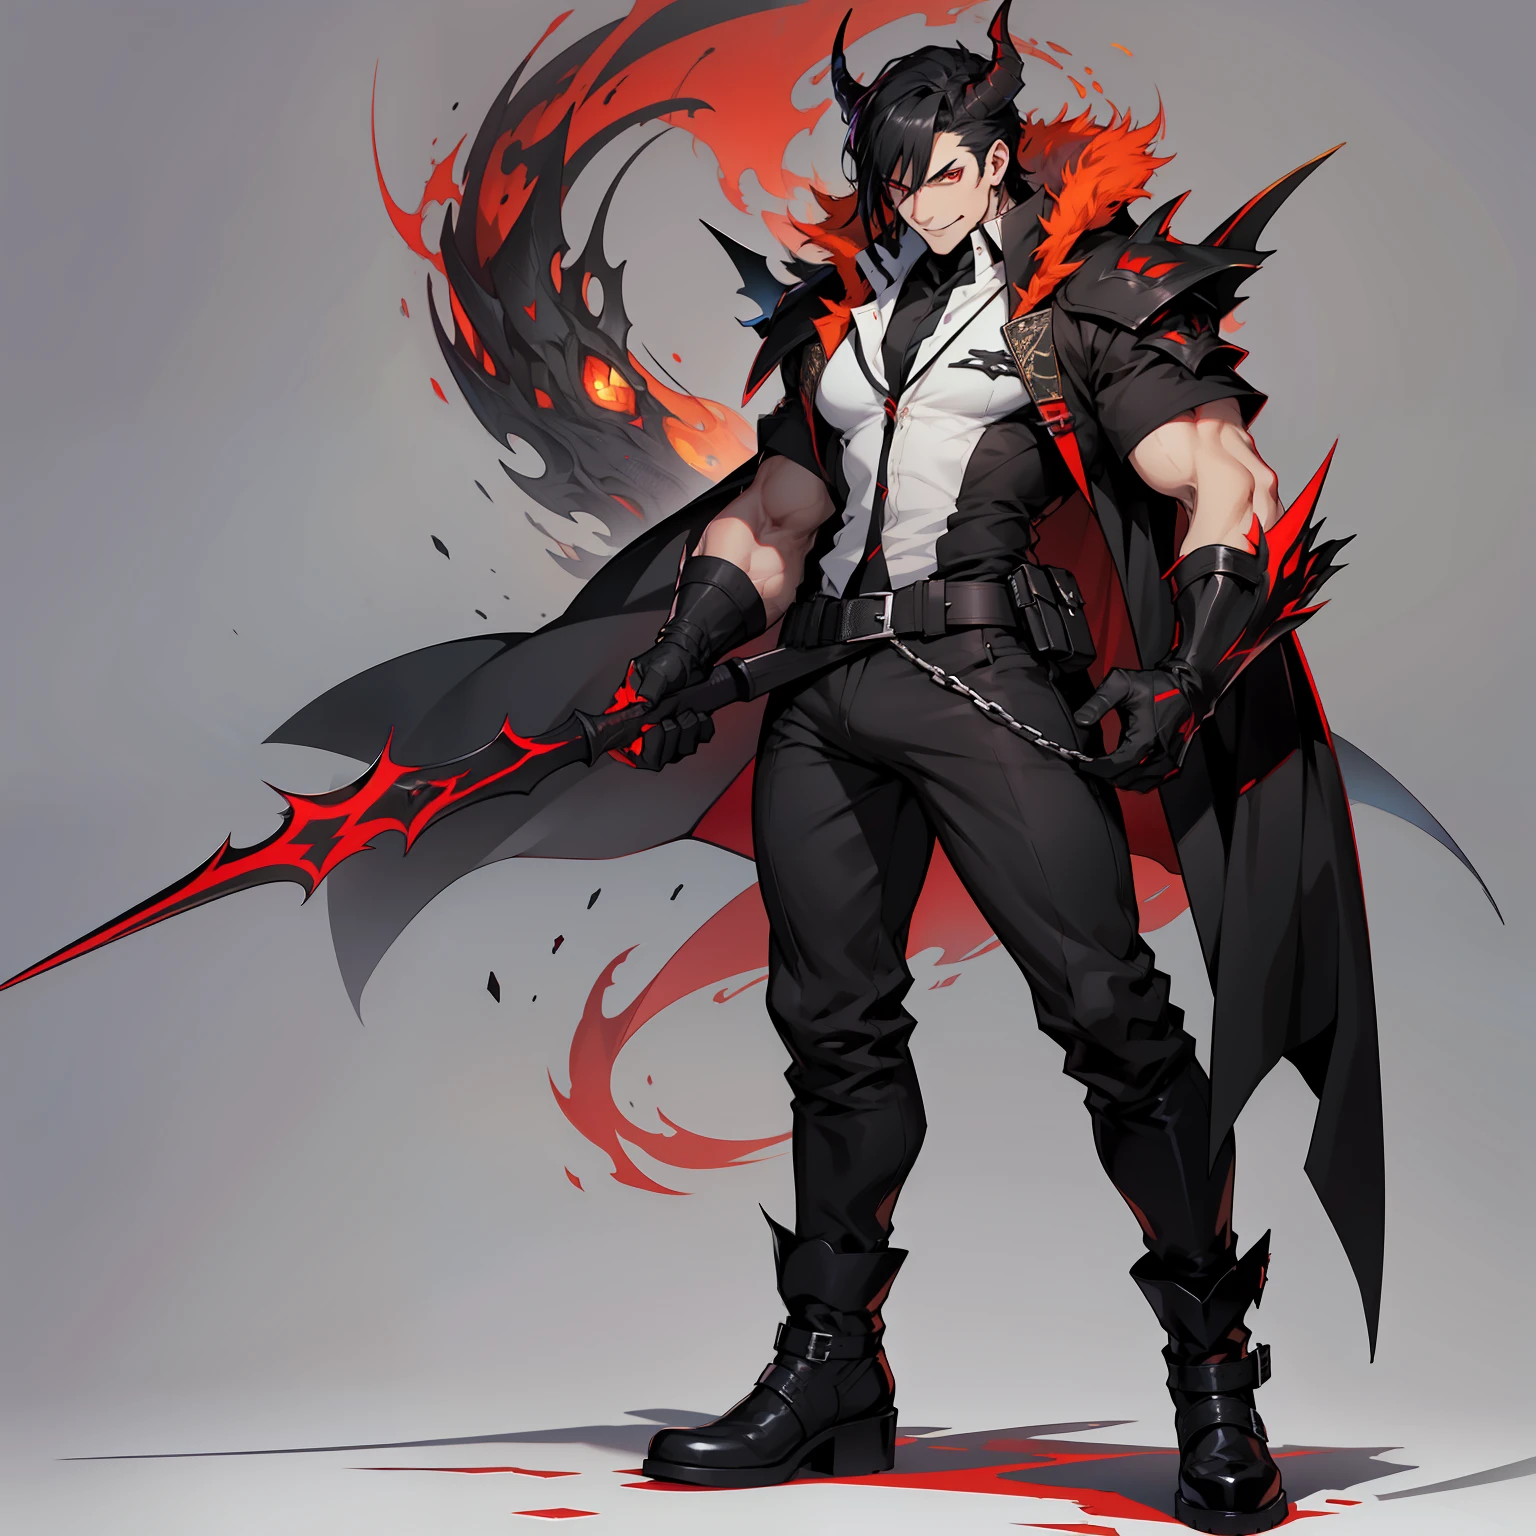 Valus is an ordinary demon standing at 1.75m tall. He has short black hair and red eyes. His skin is pale. He wears a black uniform with a white shirt underneath and black boots. Big bulge in pants. Flirty smile